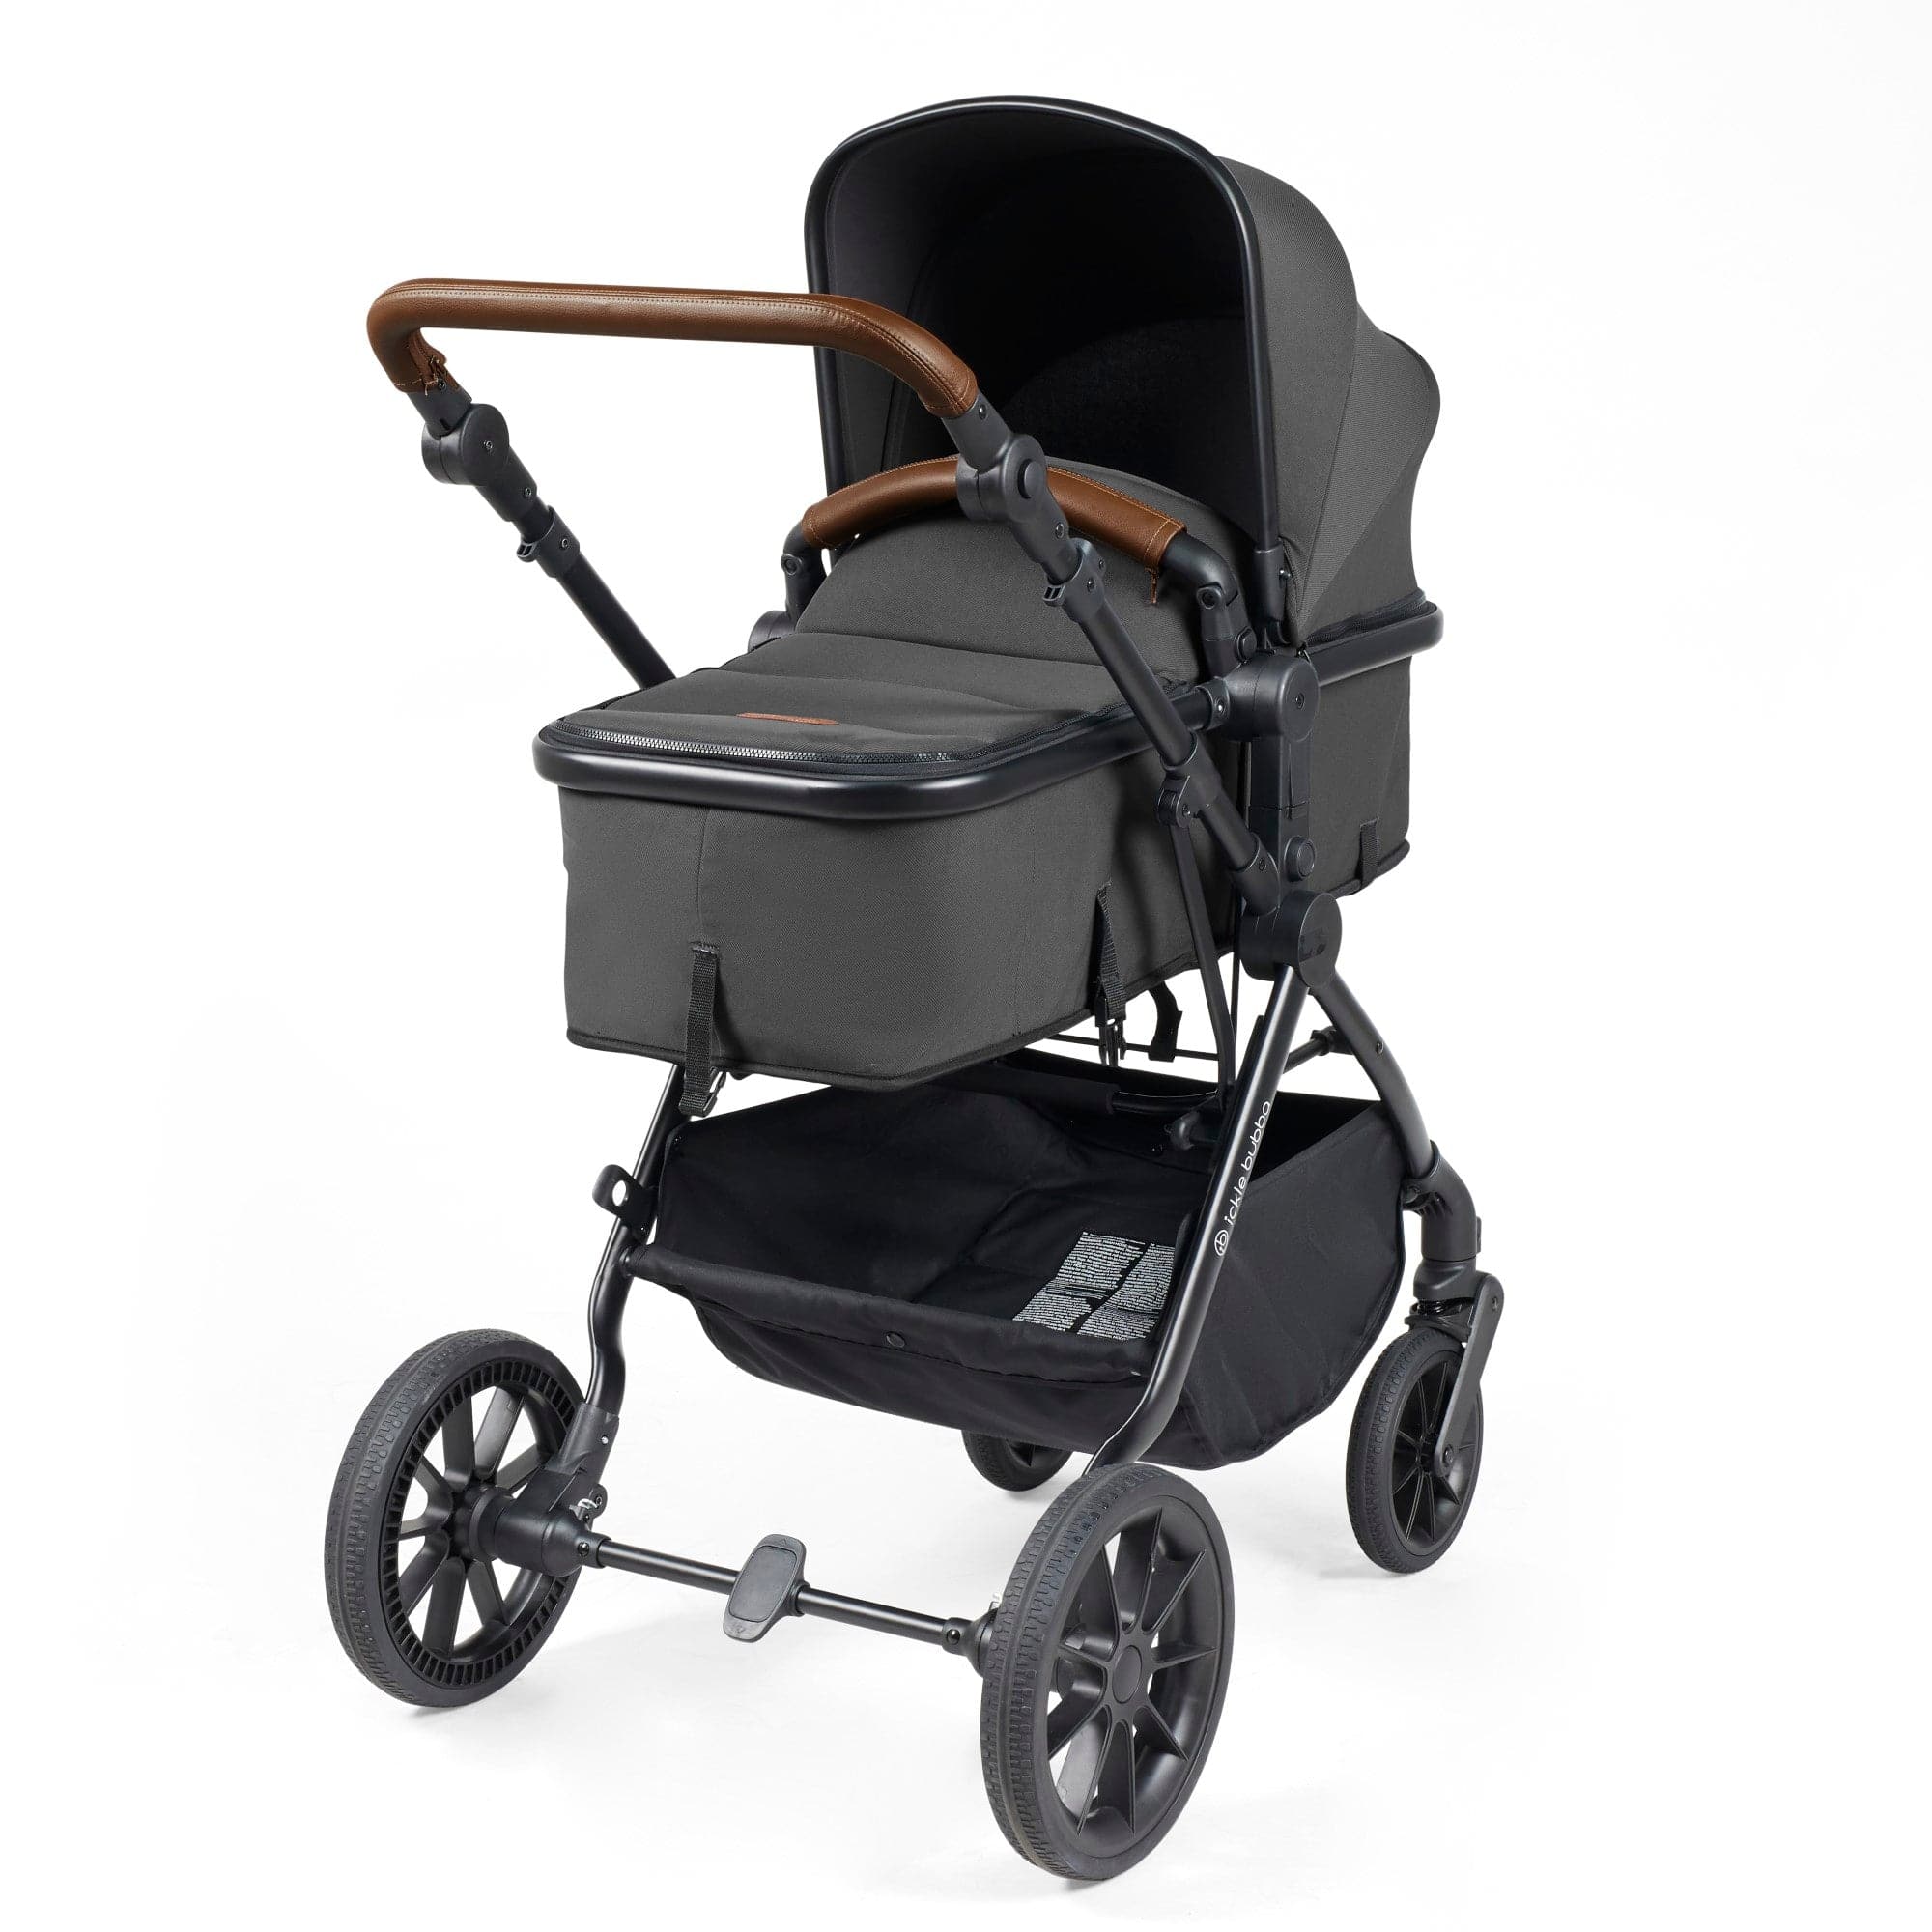 Ickle Bubba Cosmo I-Size Travel System With Stratus Car Seat & Isofix Base - Black   